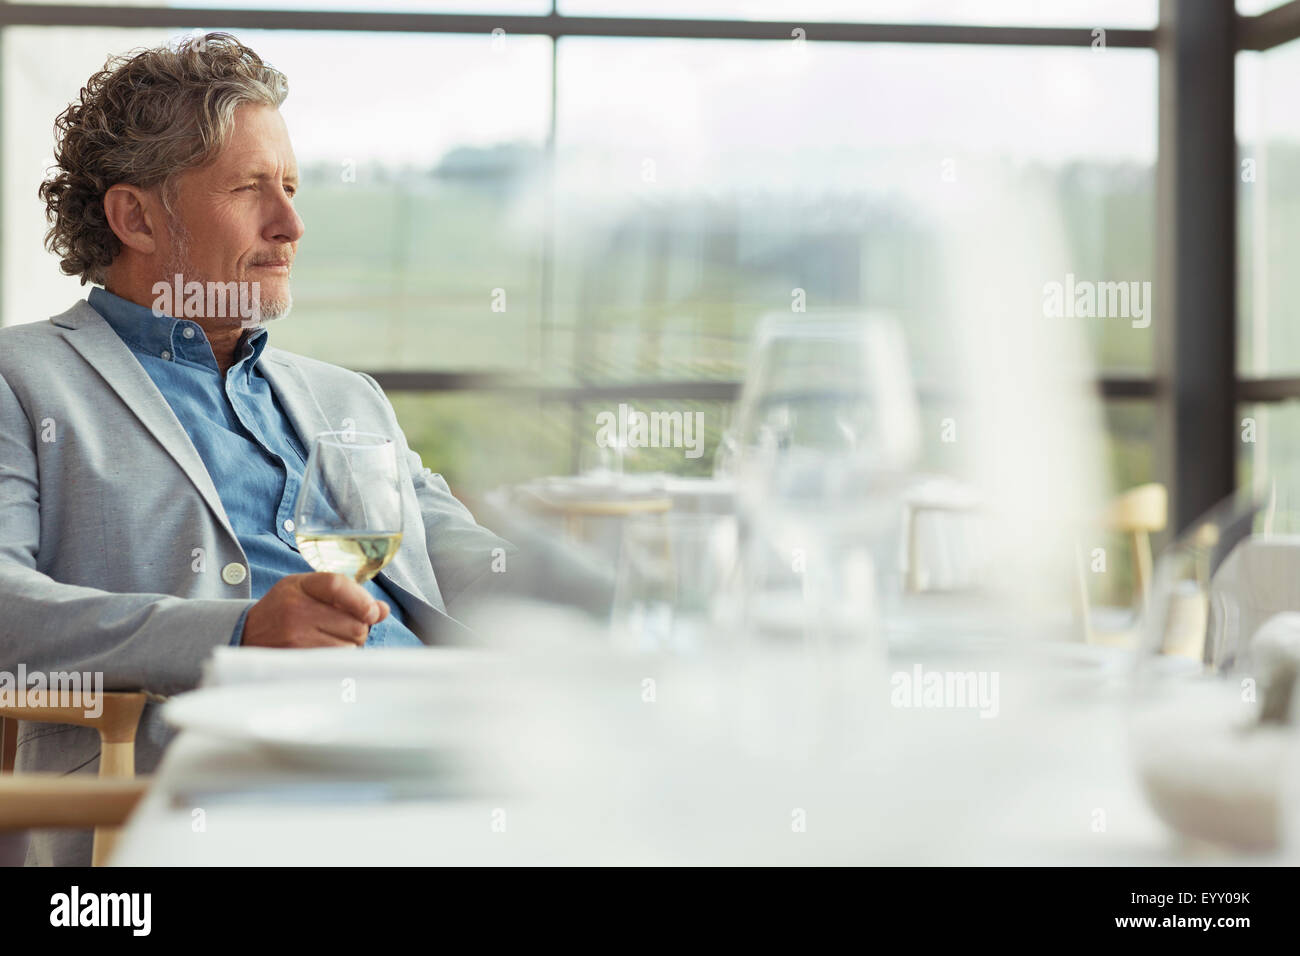 Pensive man drinking white wine in winery dining room Stock Photo